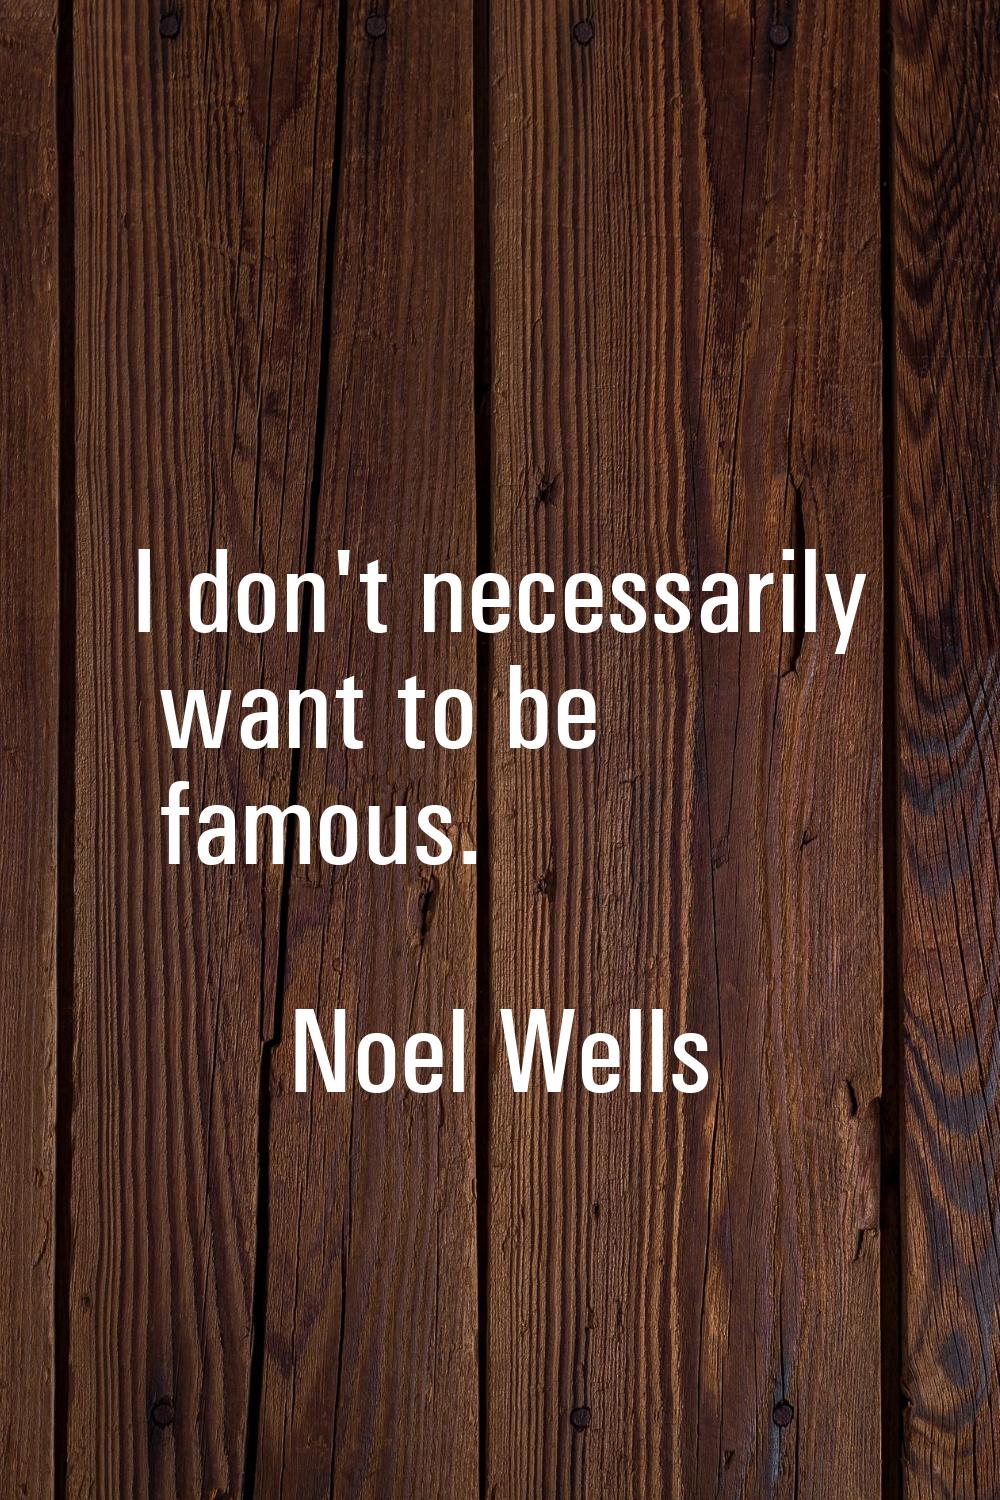 I don't necessarily want to be famous.